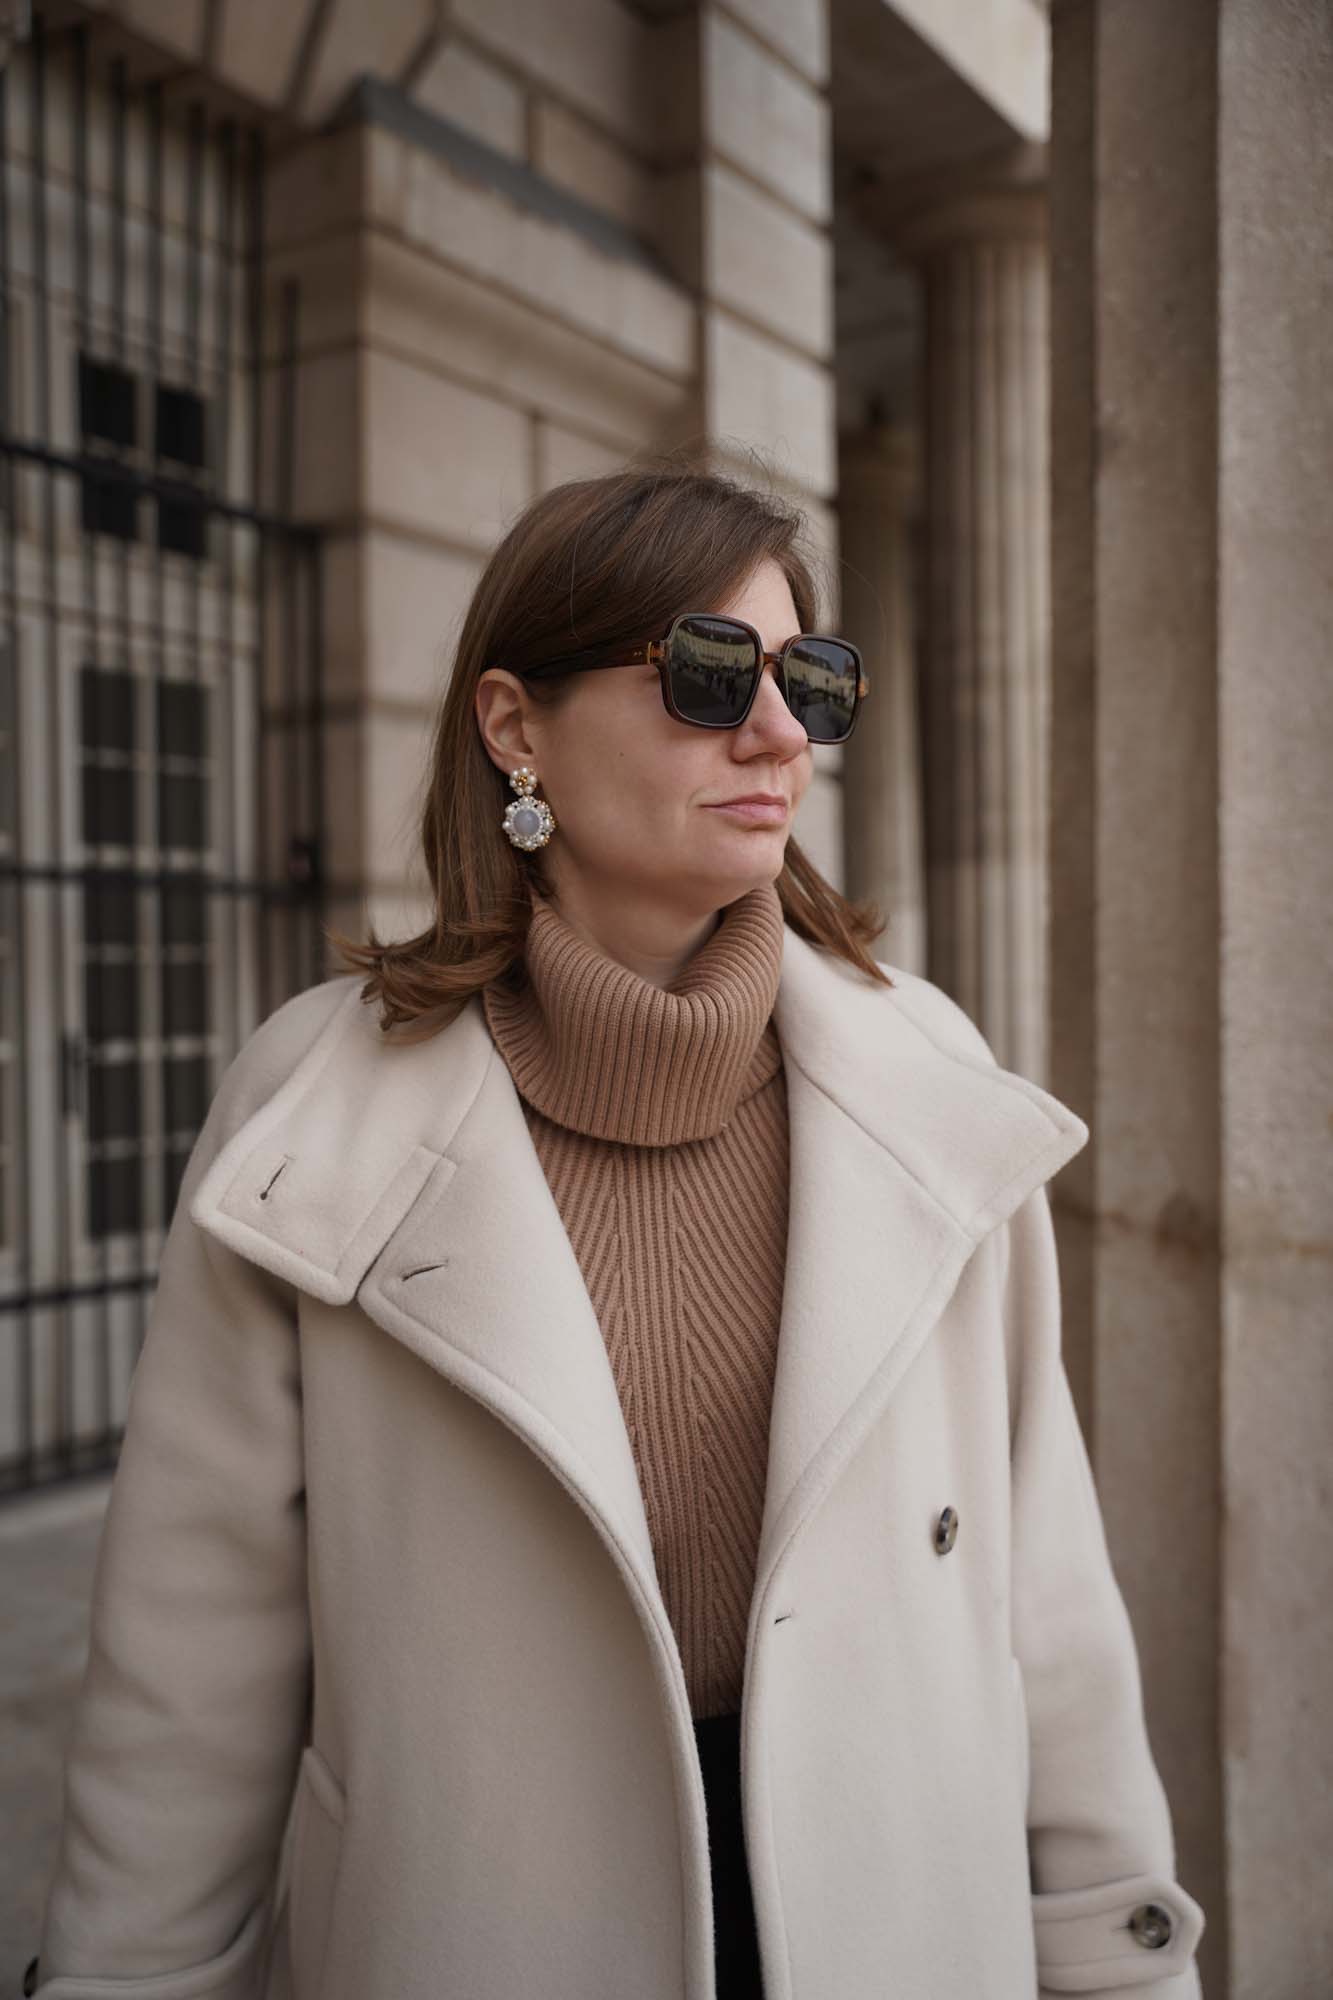 Maschalina pearl earrings, winter outfit, beige coat, mango coat, turtleneck sweater, casual chic outfit